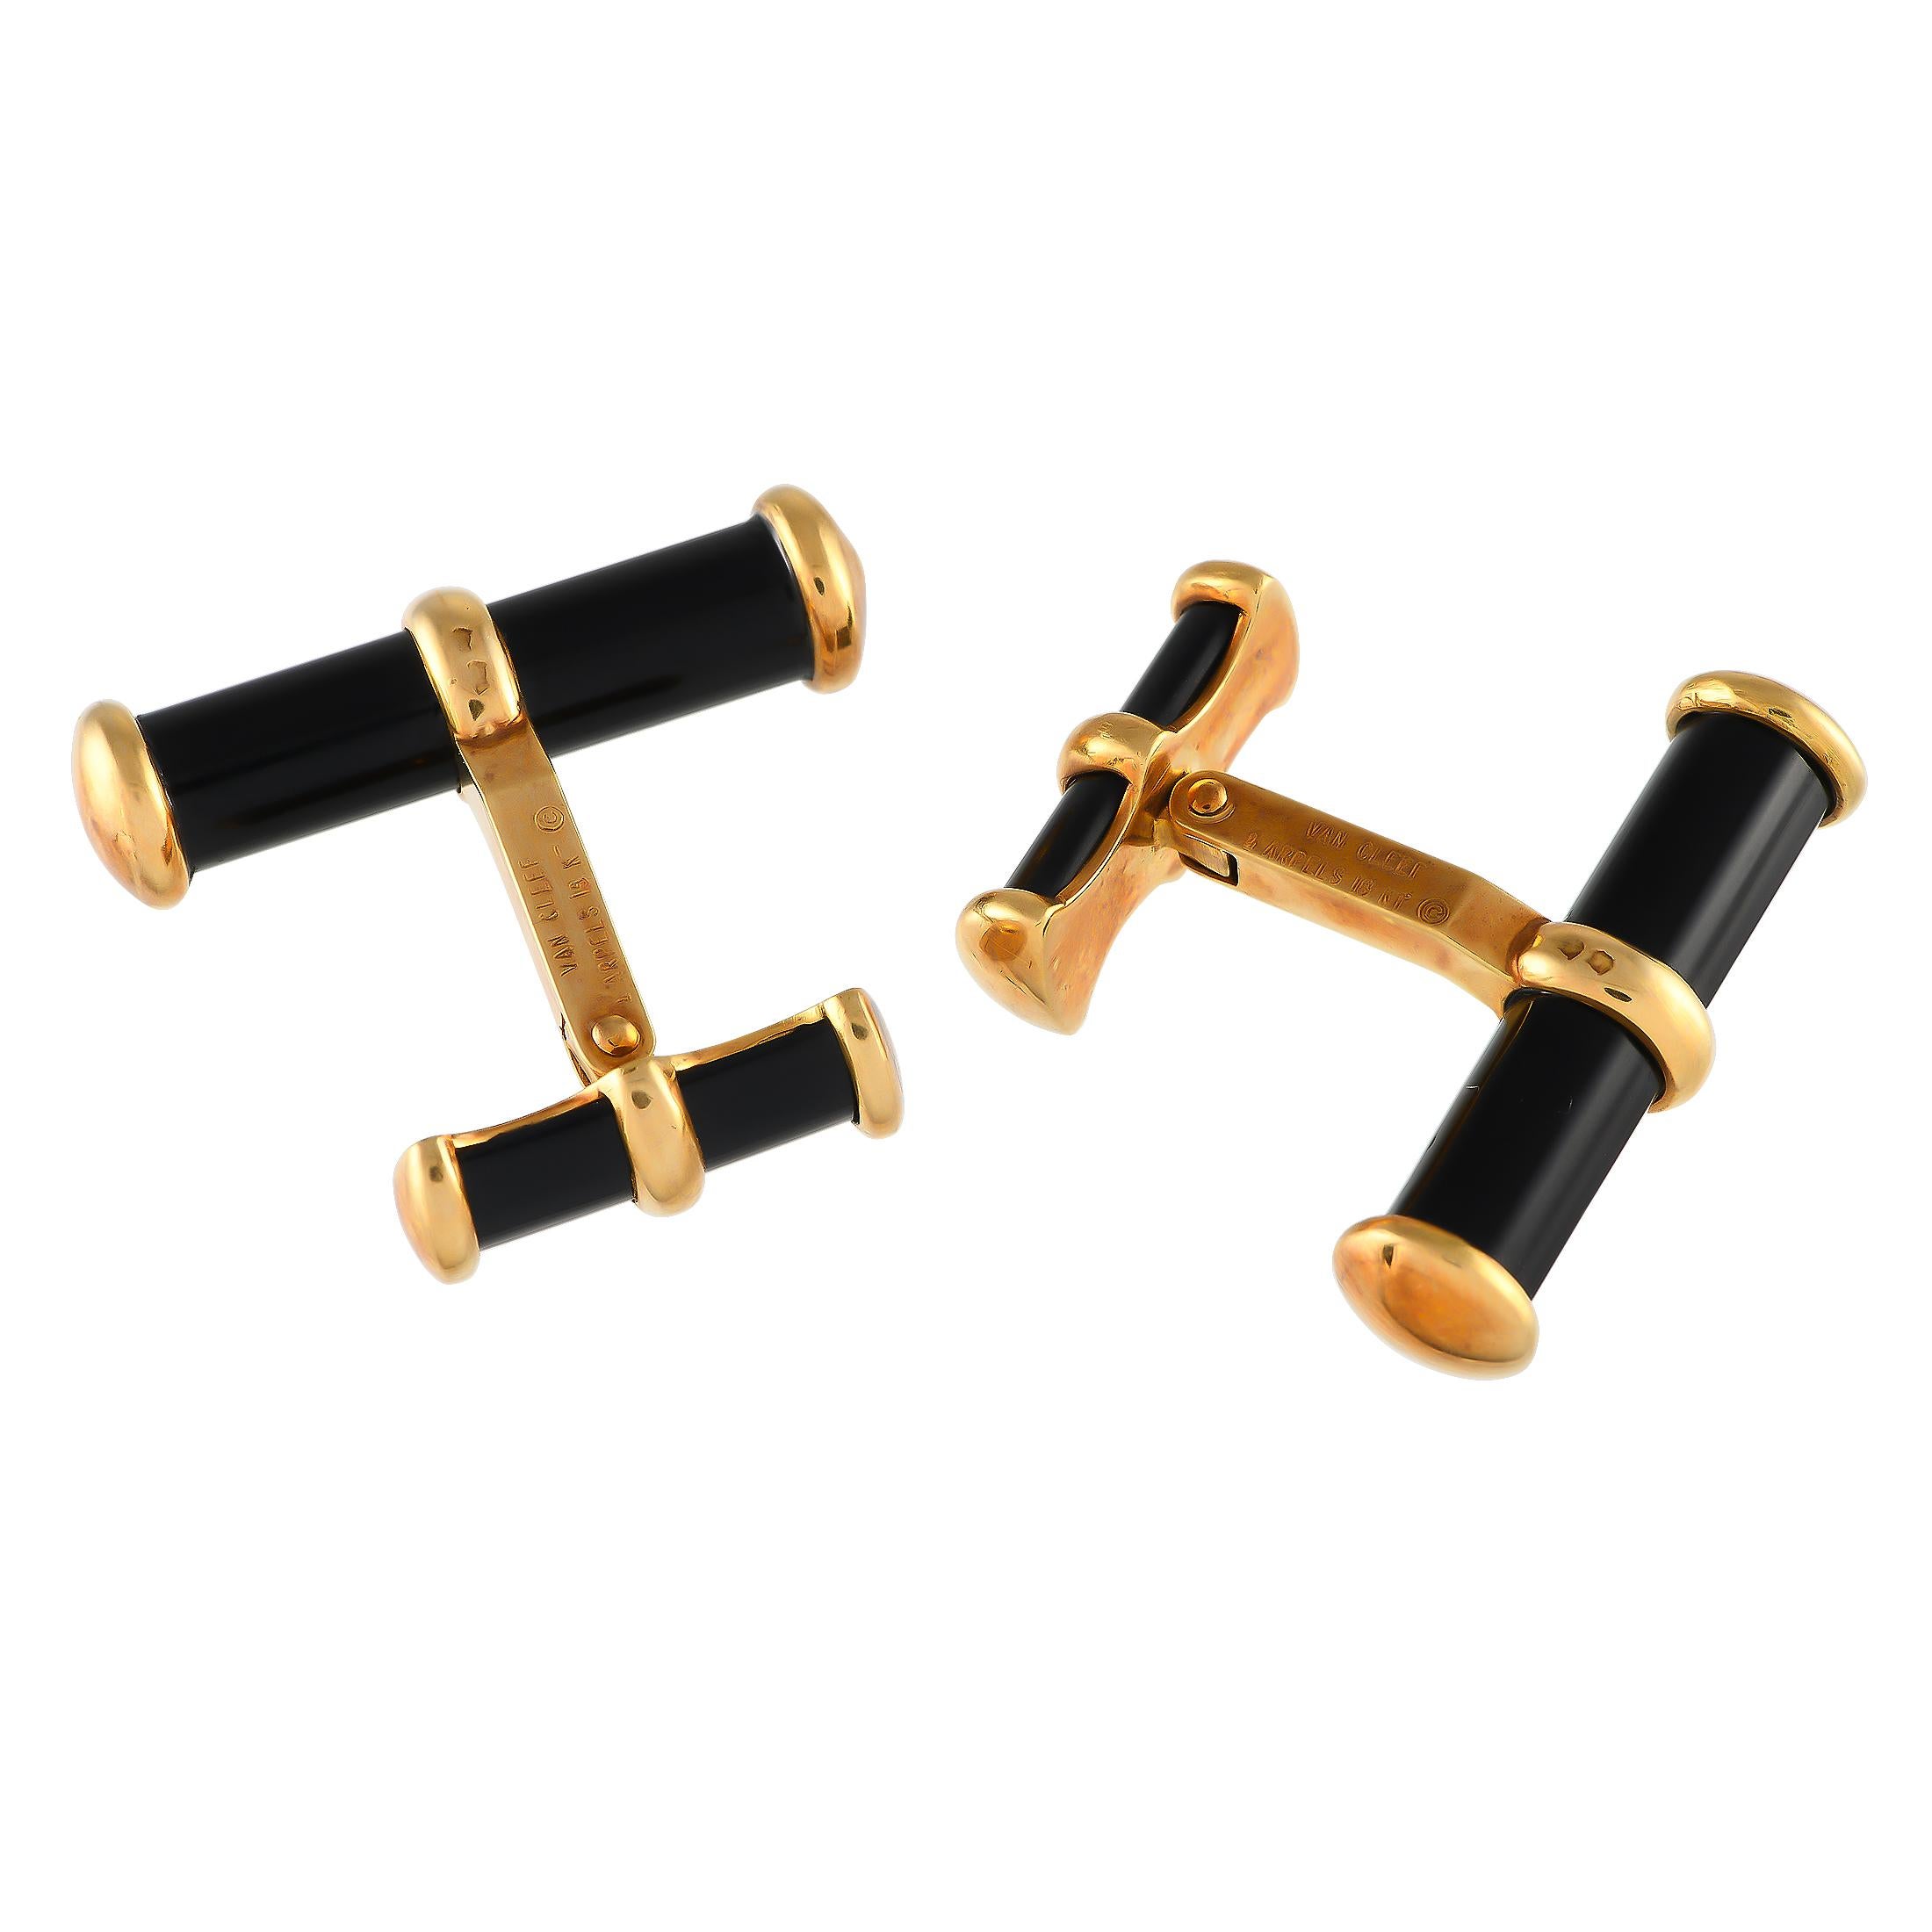 These luxurious Van Cleef & Arpels cufflinks will elevate any suited ensemble. Sleek and sophisticated in design, each one measures 1.0 by 1.0 and features a striking combination of 18K Yellow Gold and black Onyx gemstones.This jewelry piece is